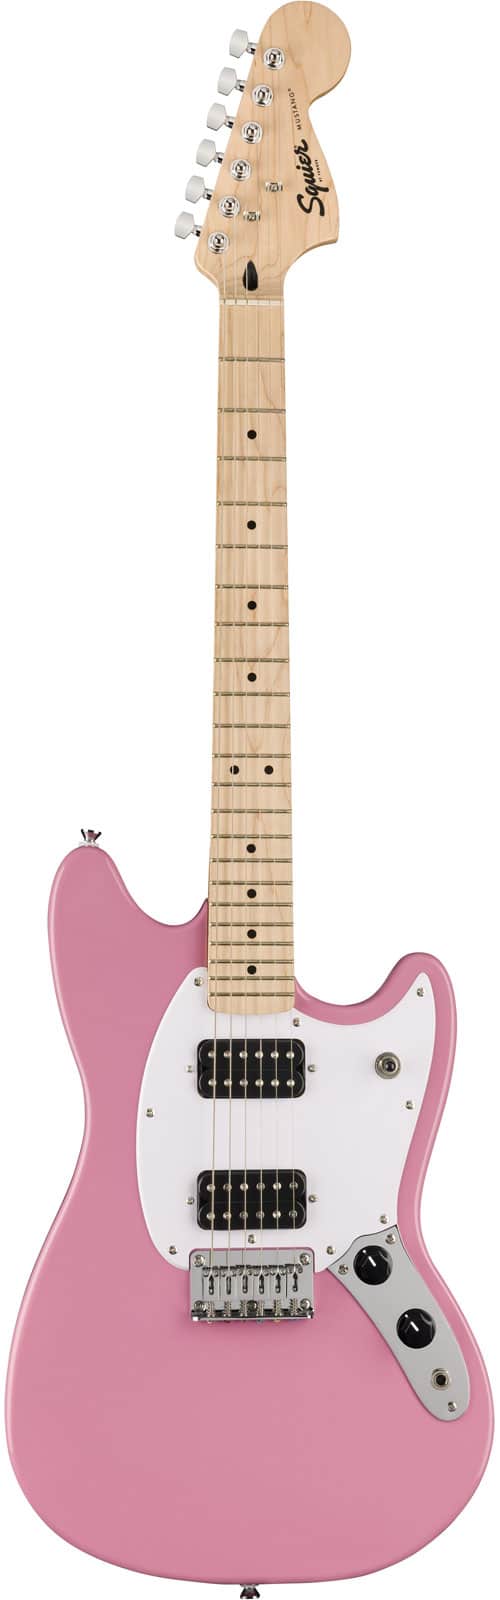 SQUIER MUSTANG HH SONIC MN FLASH PINK